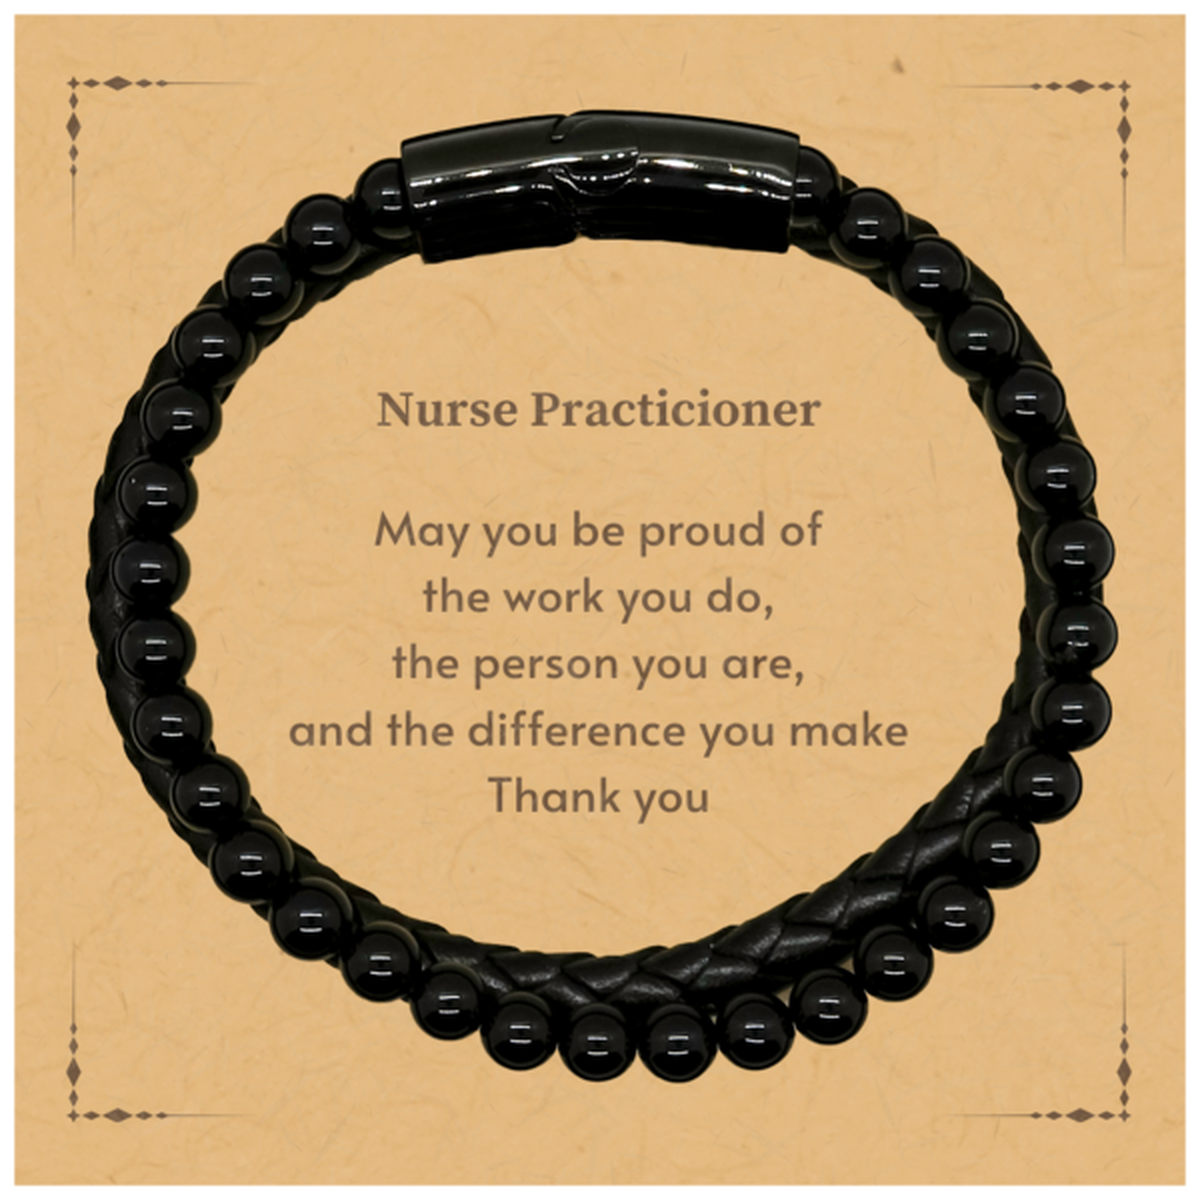 Heartwarming Stone Leather Bracelets Retirement Coworkers Gifts for Nurse Practicioner, Nurse Practicioner May You be proud of the work you do, the person you are Gifts for Boss Men Women Friends